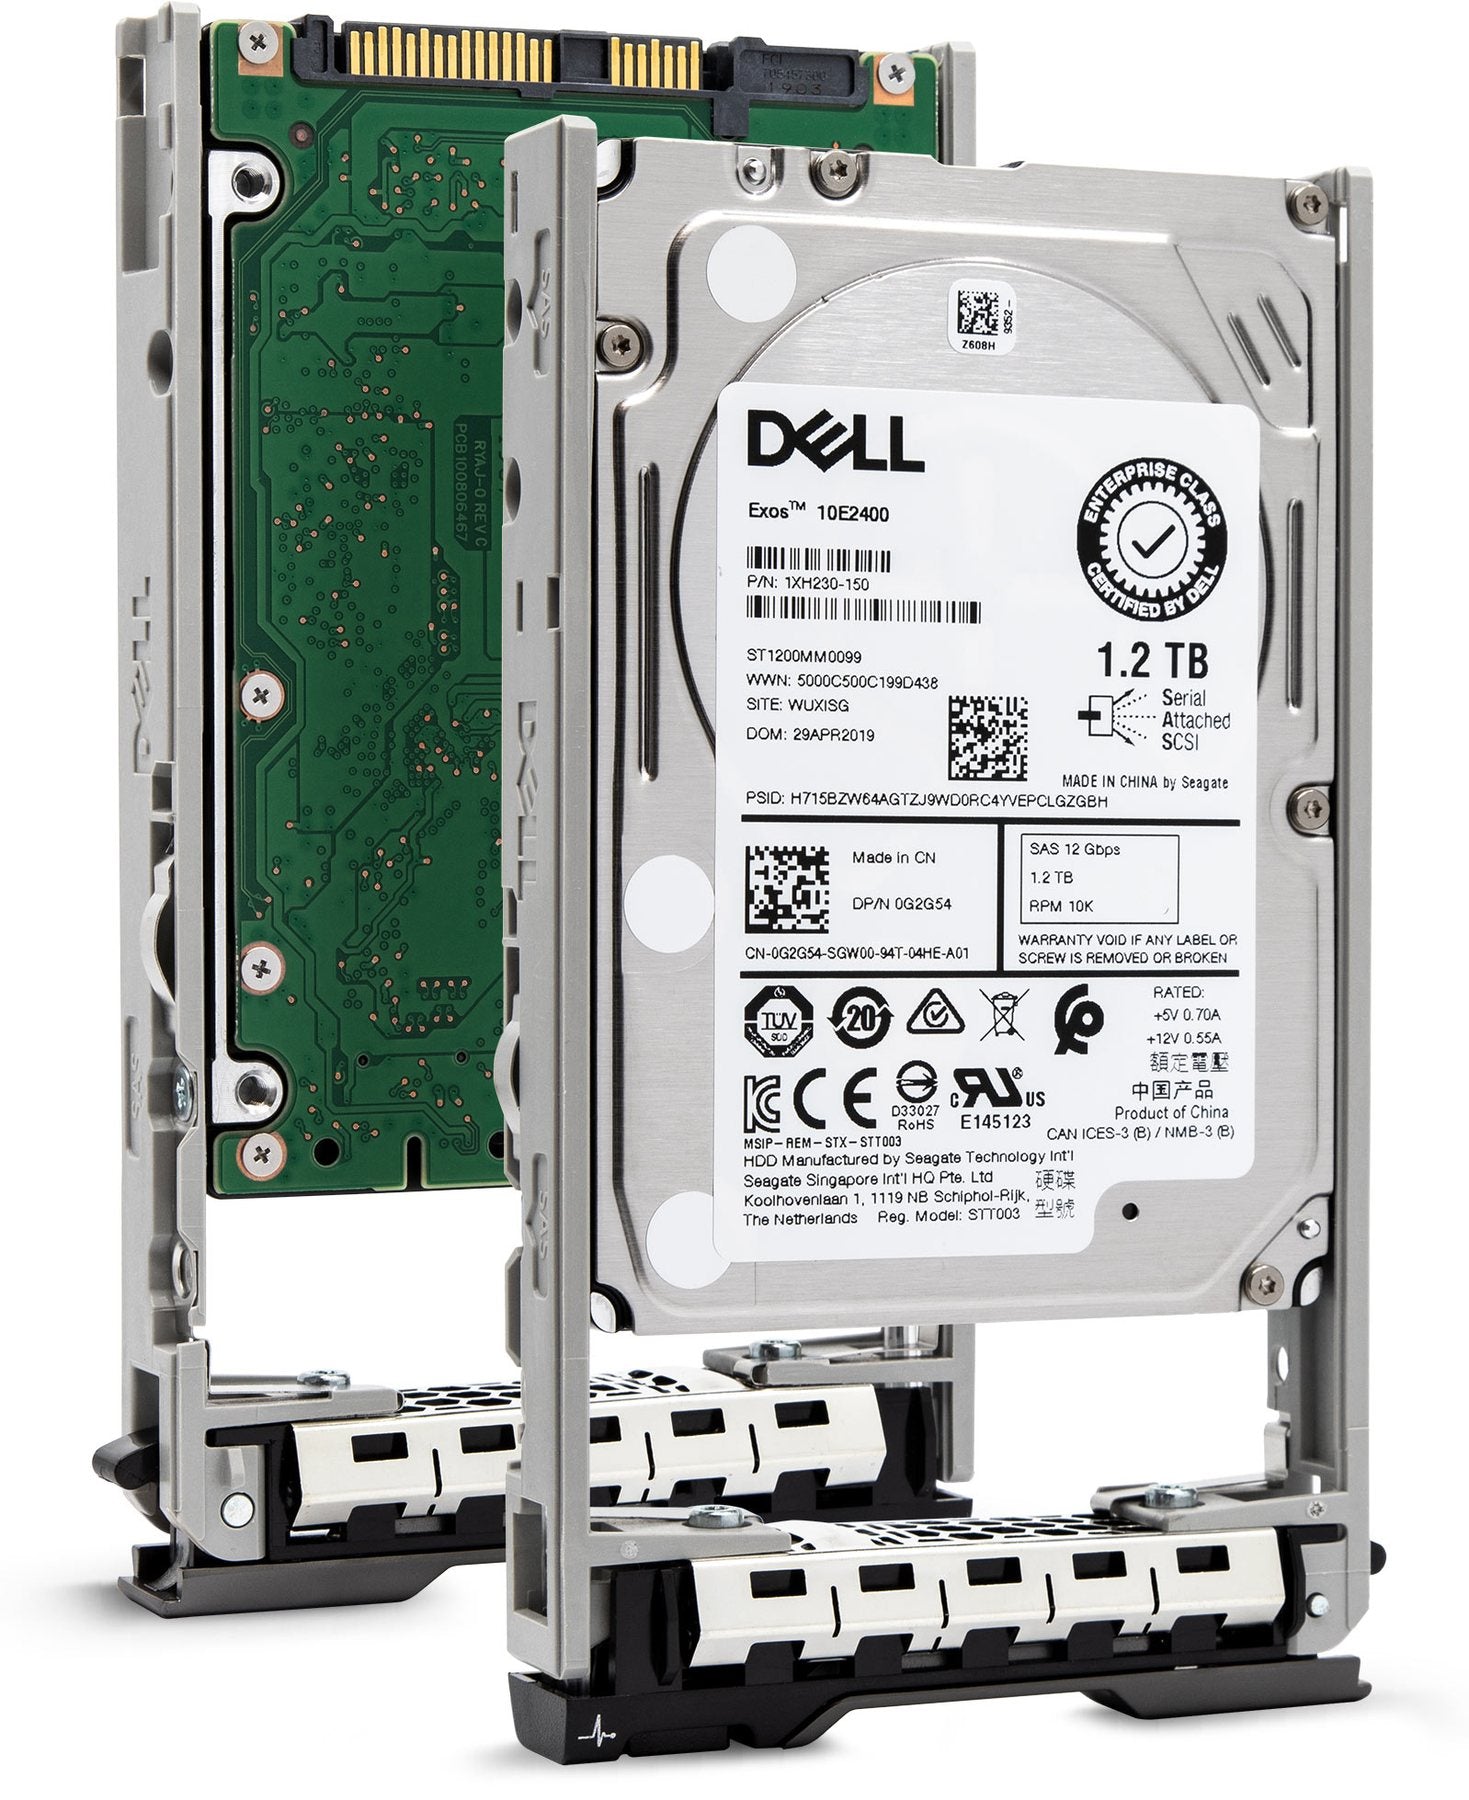 Dell G13 0FK73M 1.2TB 10K RPM SAS 12Gb/s 512n 2.5" Manufacturer Recertified HDD